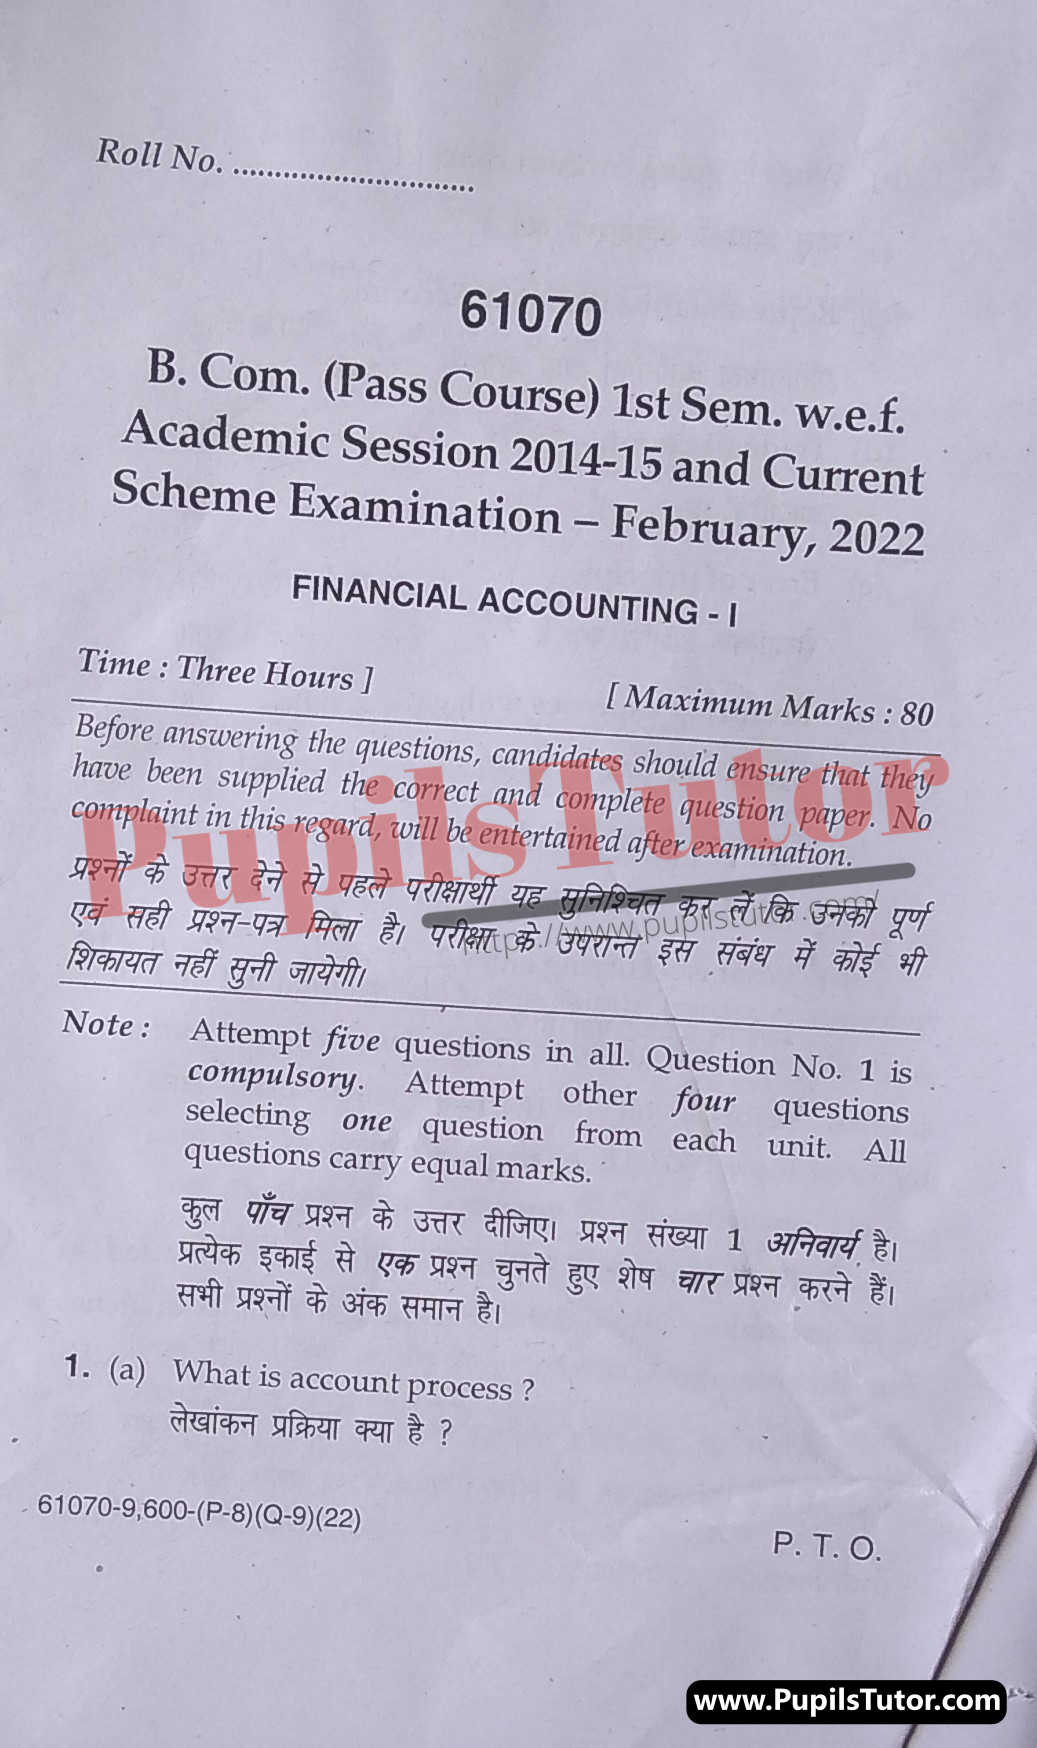 MDU (Maharshi Dayanand University, Rohtak Haryana) Bcom Pass Course First Semester Previous Year Financial Accounting Question Paper For February, 2022 Exam (Question Paper Page 1) - pupilstutor.com